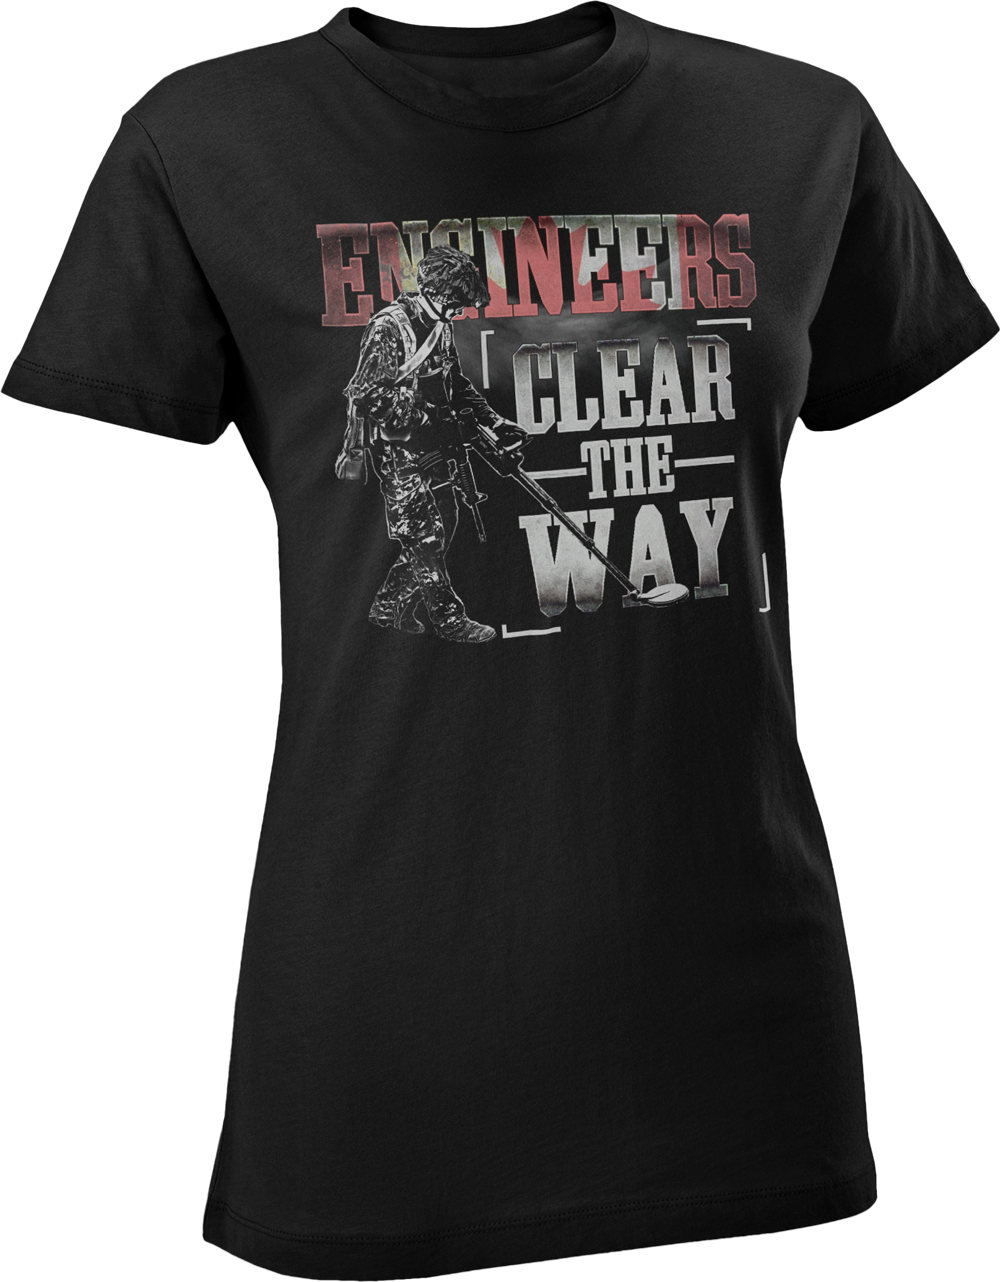 Engineers Clear The Way Women's T-Shirt